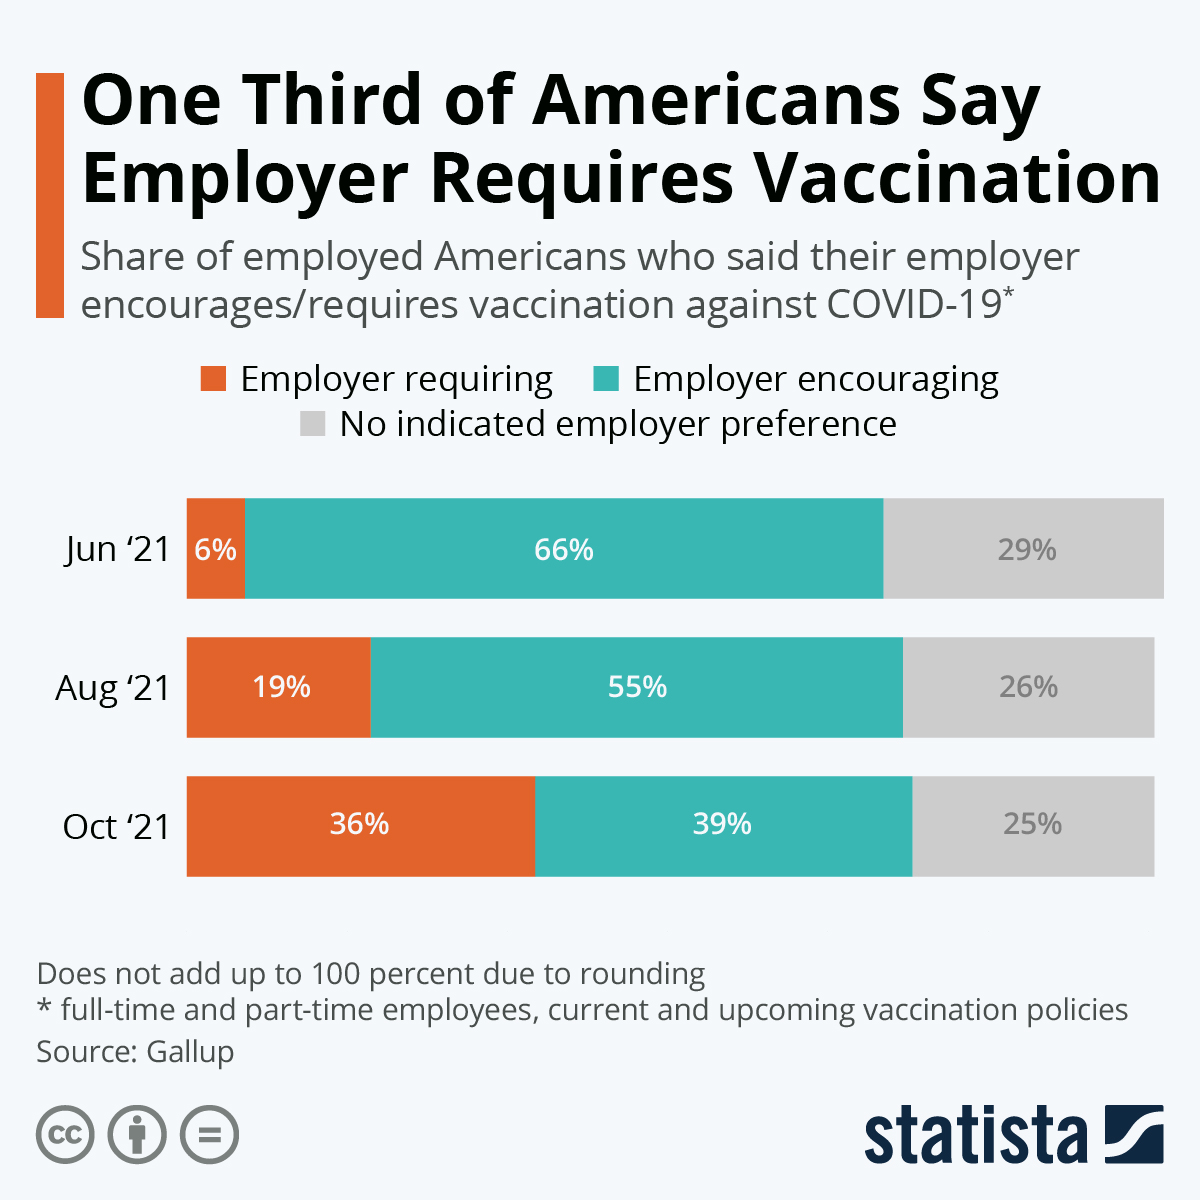 One Third of Americans Say Employer Requires Vaccination